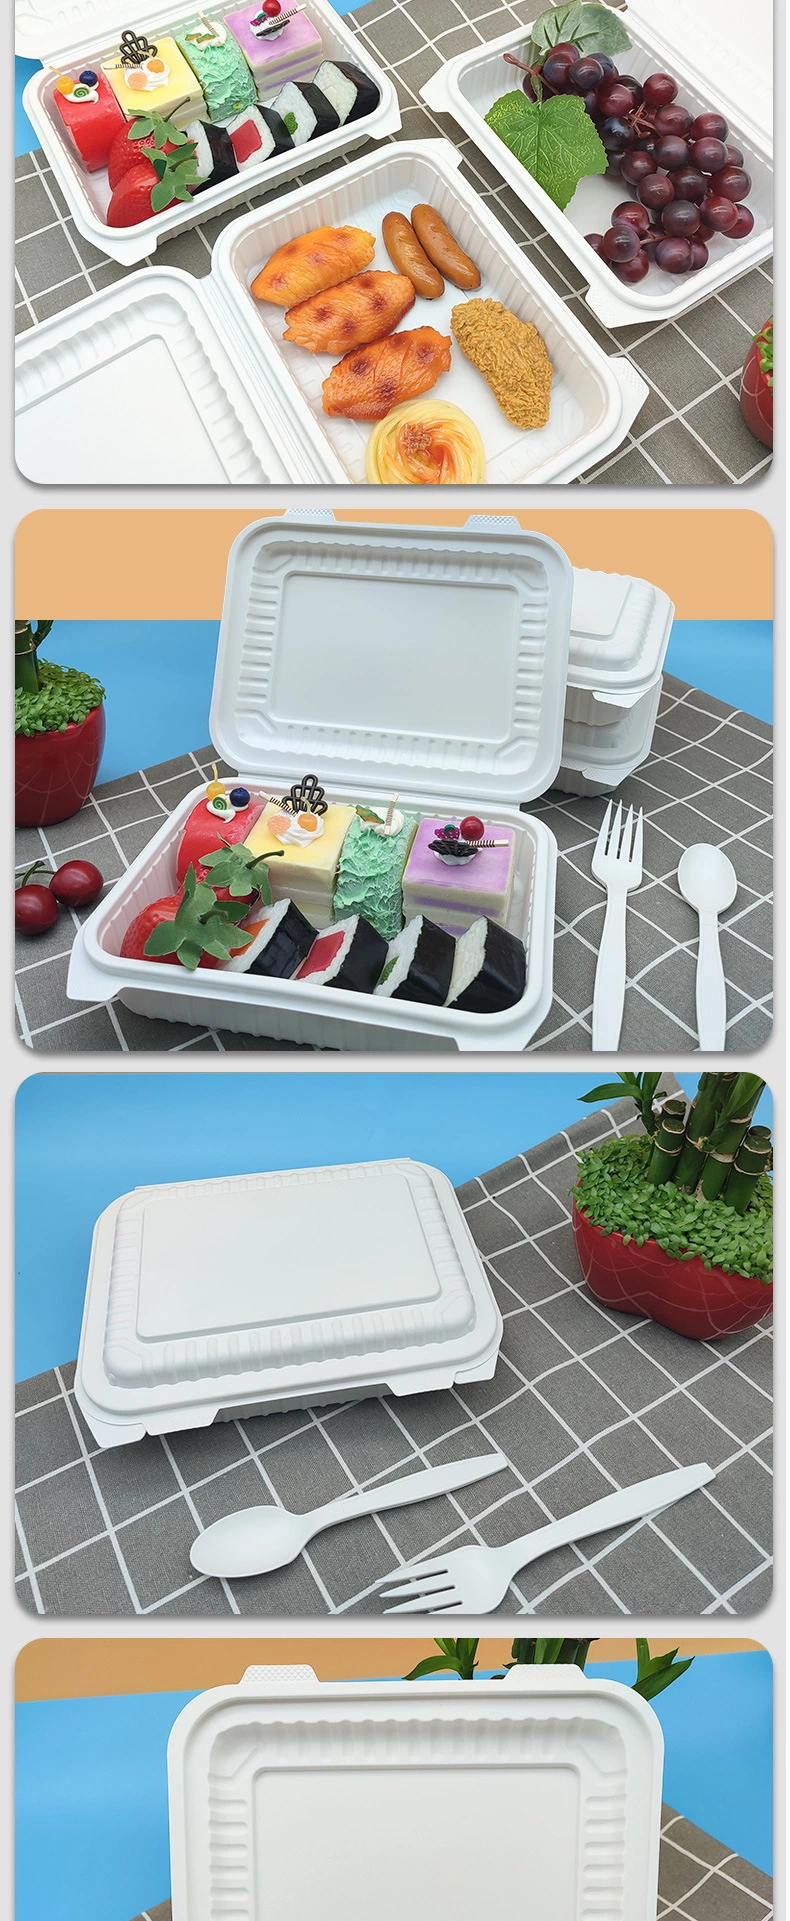 Wholesale Western Cuisine Hamburg Salad Folding Plastic Starch-Based PLA Pbat Takeout Food Biodegradable Disposable Lunch Container Box